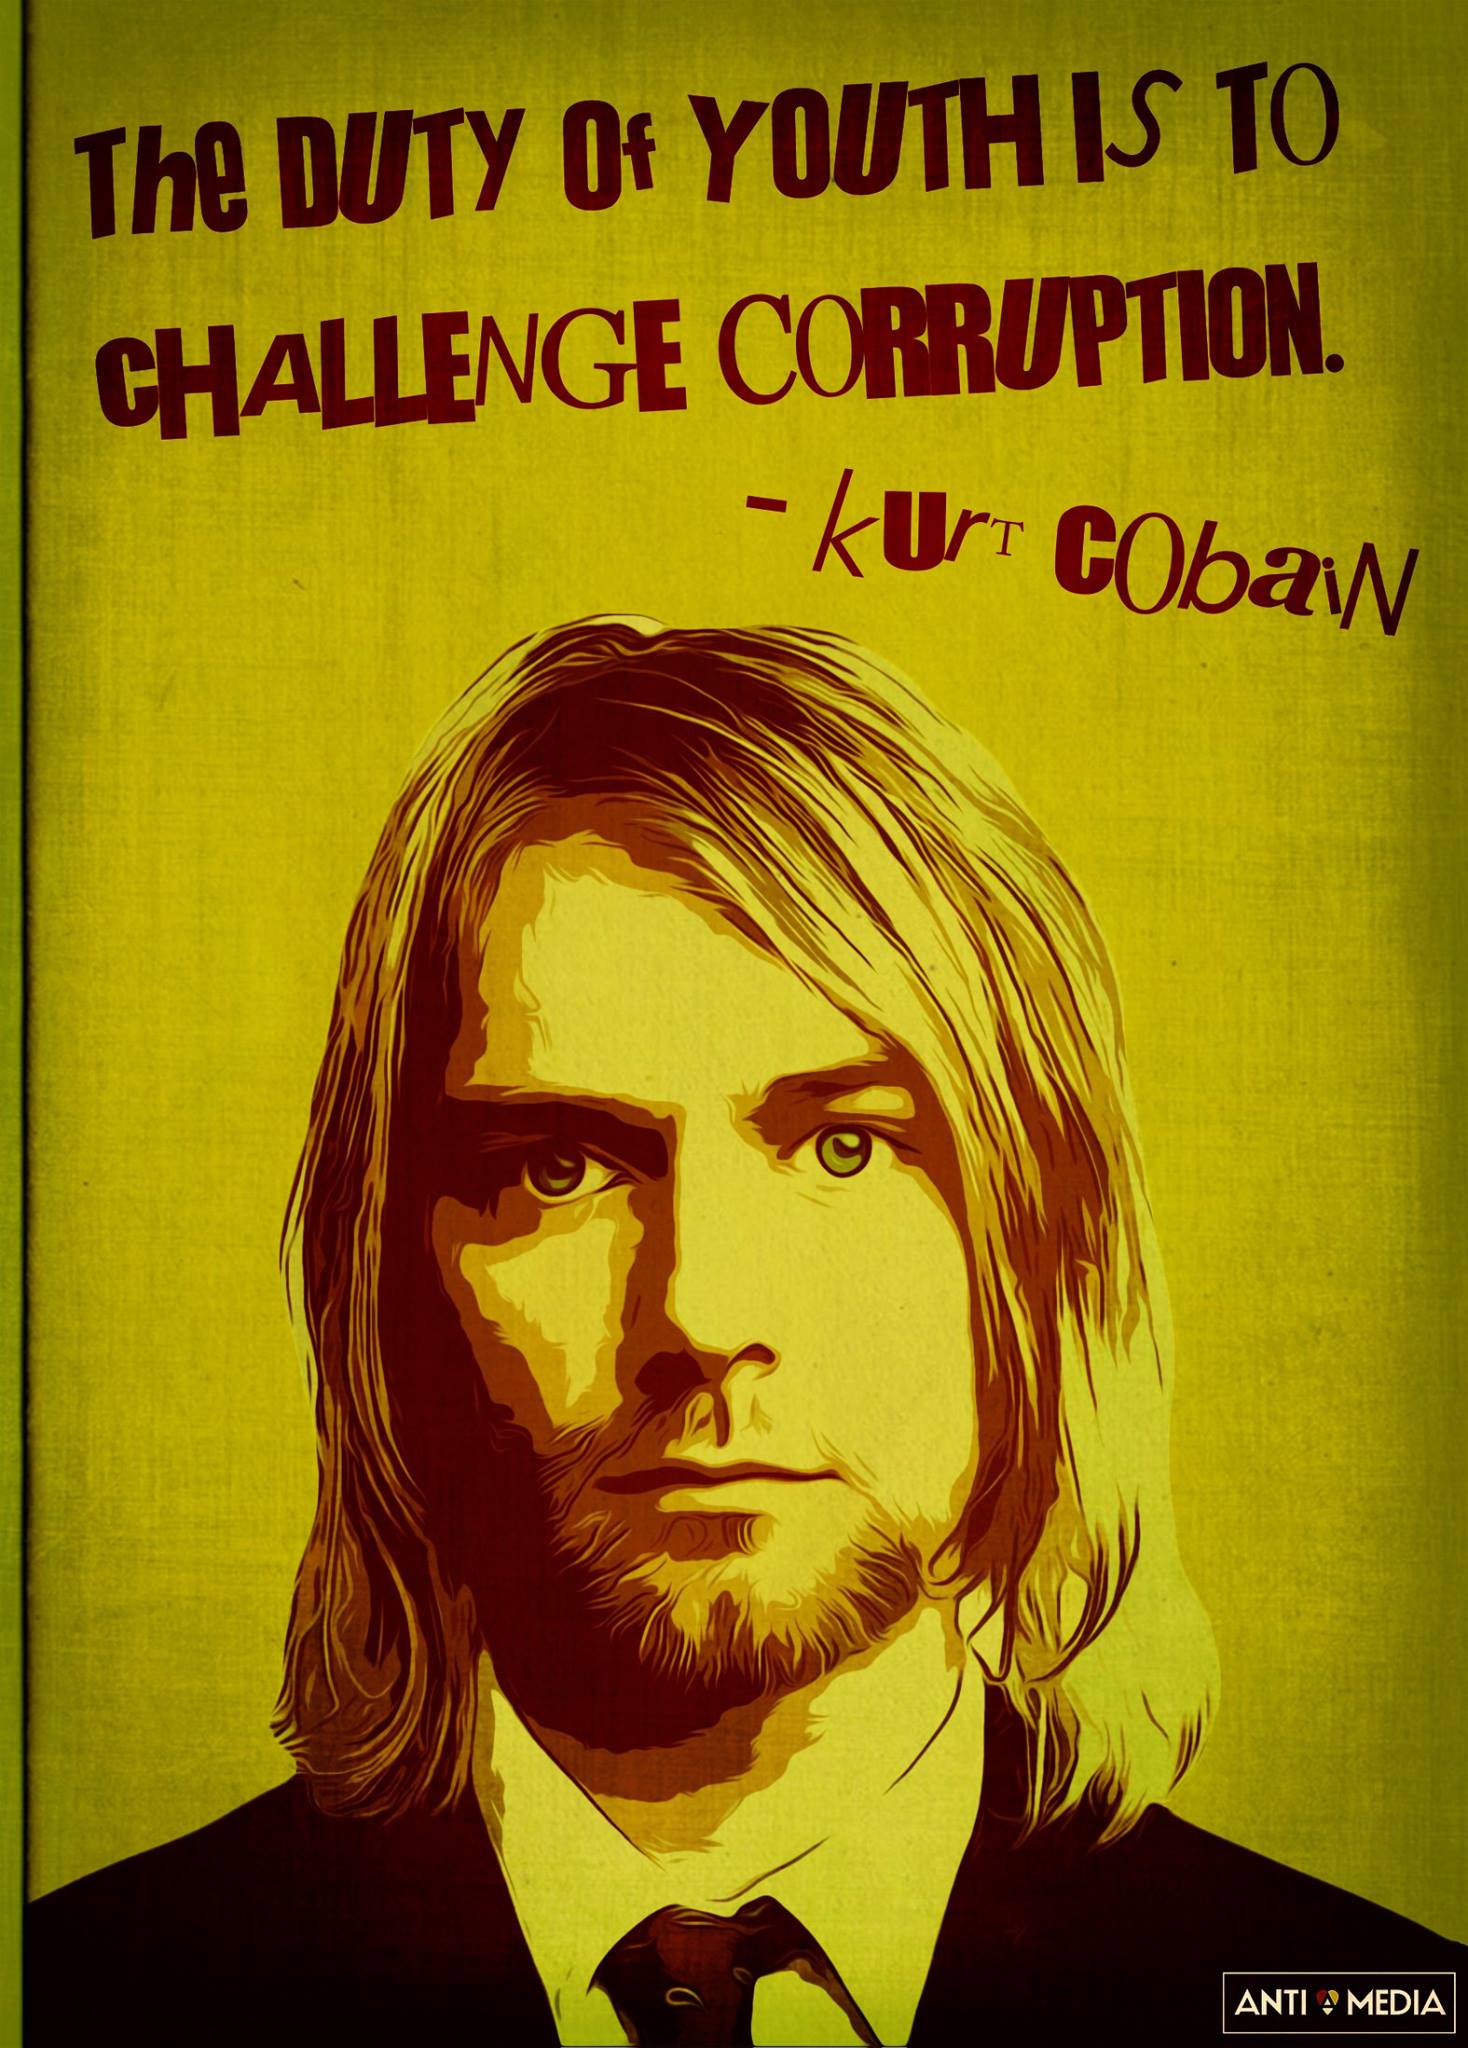 the duty of youth is to challenge corruption, kurt cobain